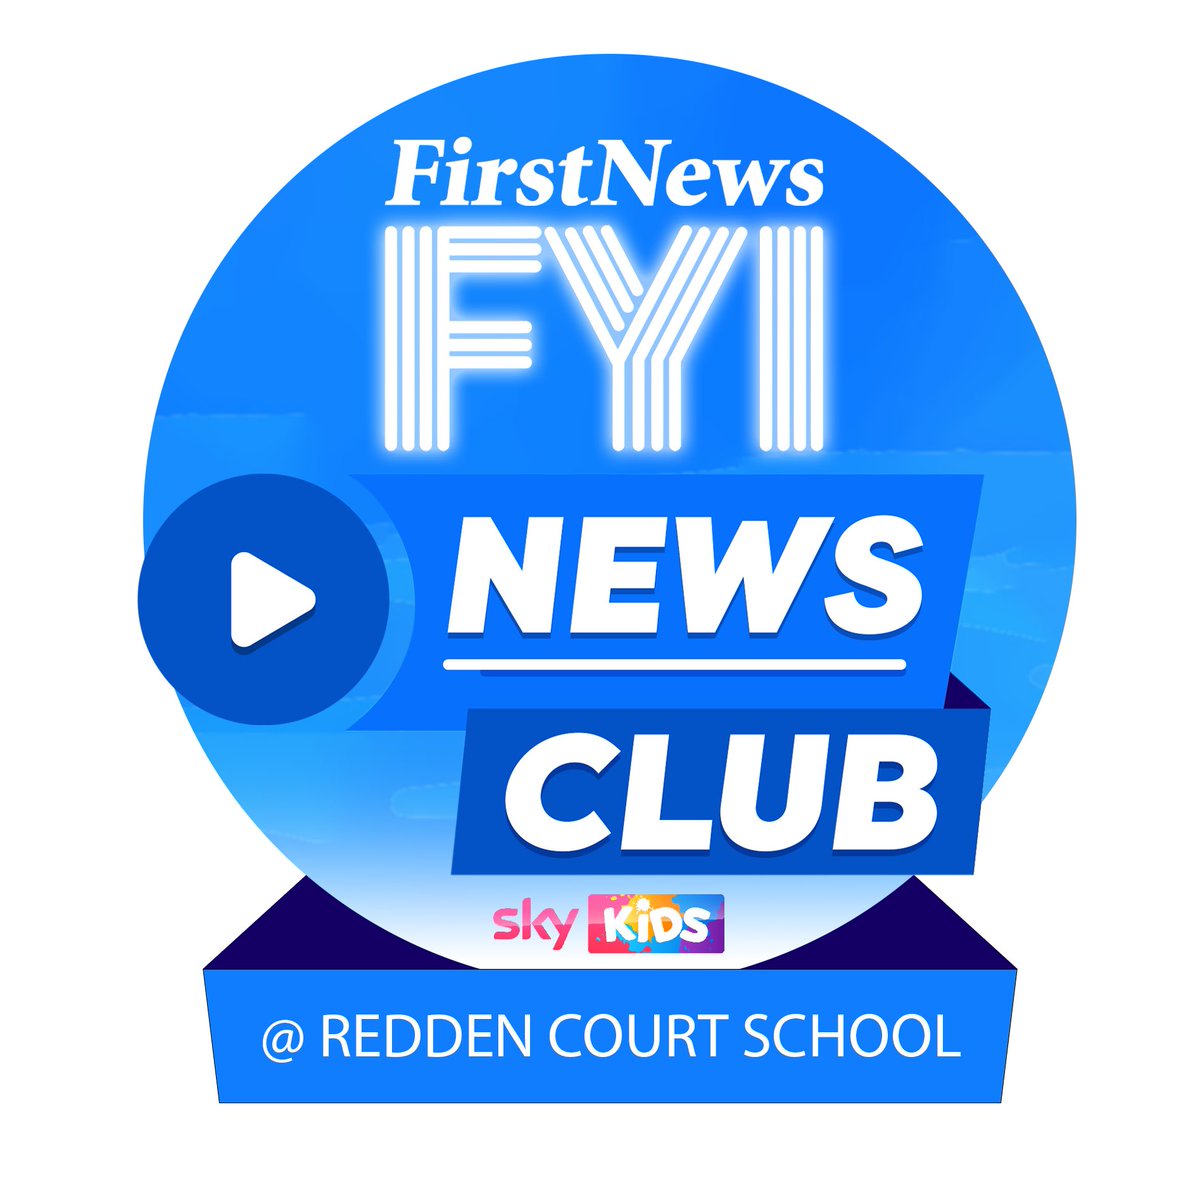 📝We are excited to announce our official Redden Court News Club! With the support of @First_News, the News Club will be reporting on current affairs, learning how speak like a newsreader, and developing their communication skills! For more information, speak to Mrs Cole!